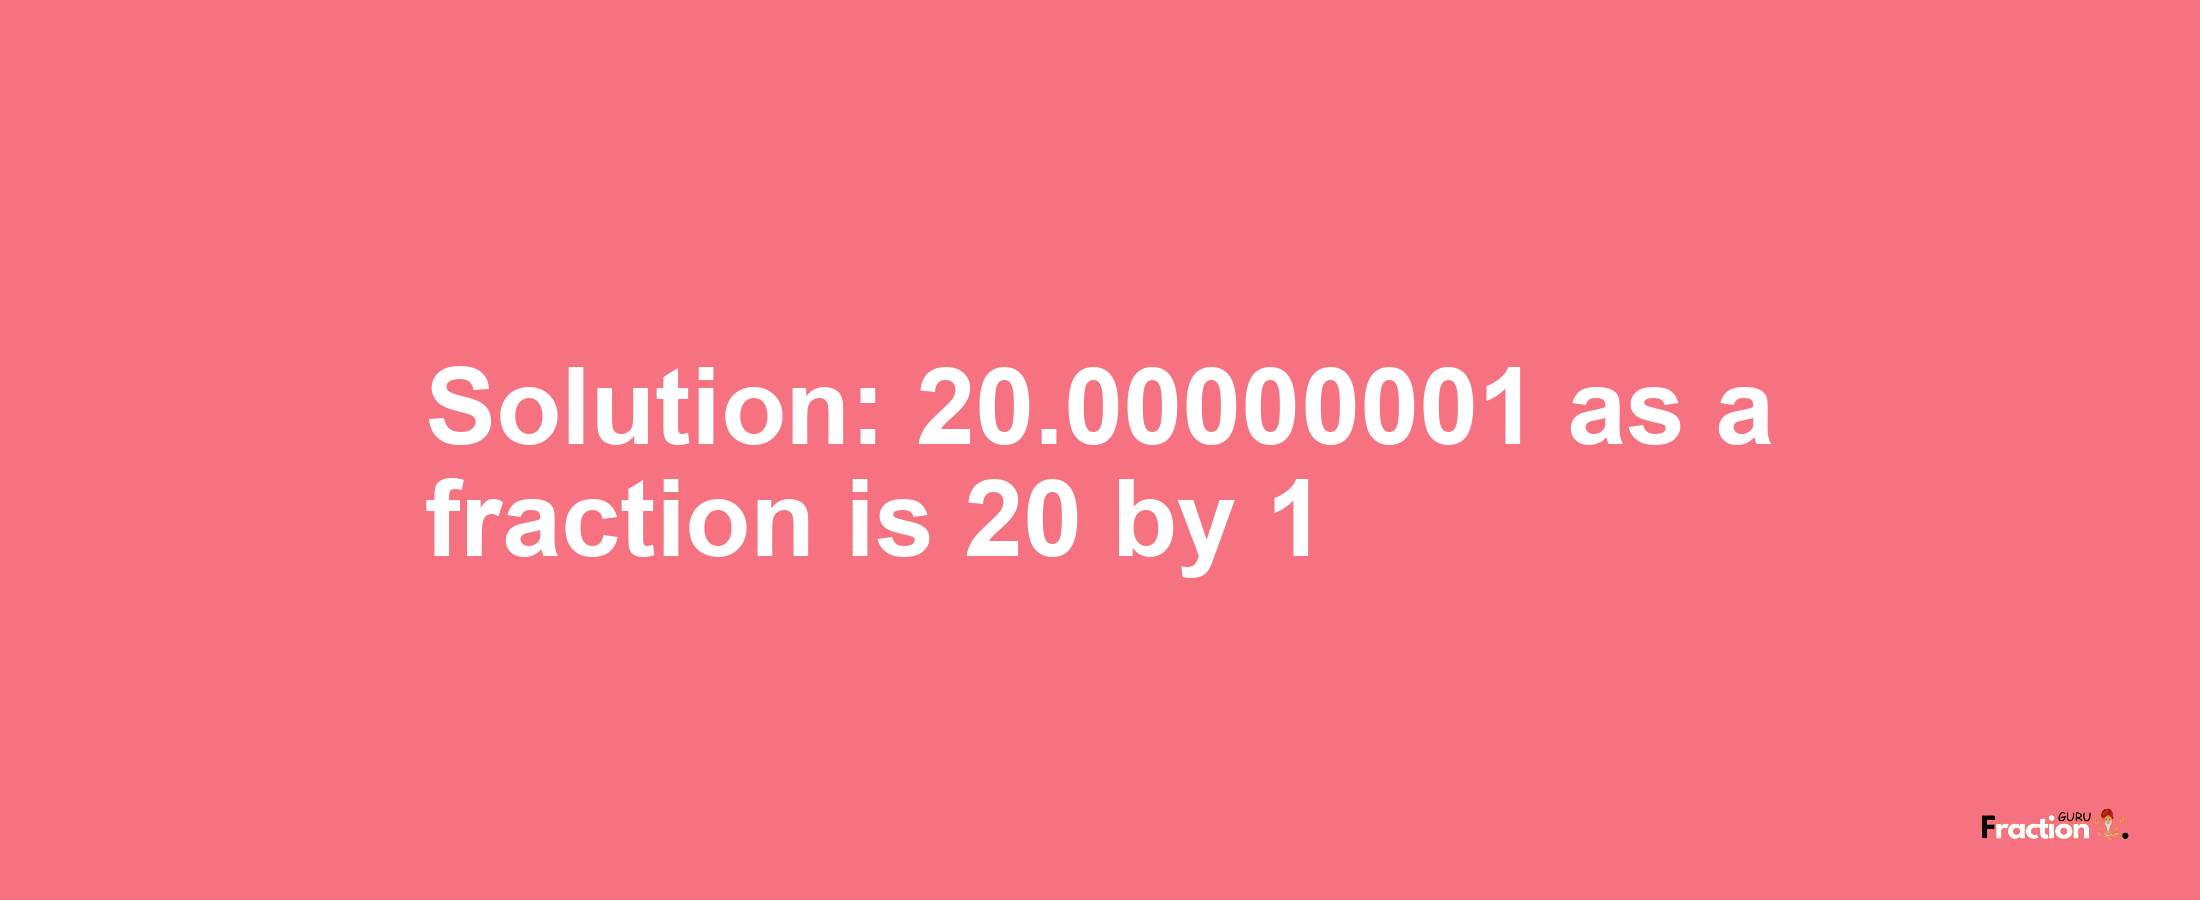 Solution:20.00000001 as a fraction is 20/1